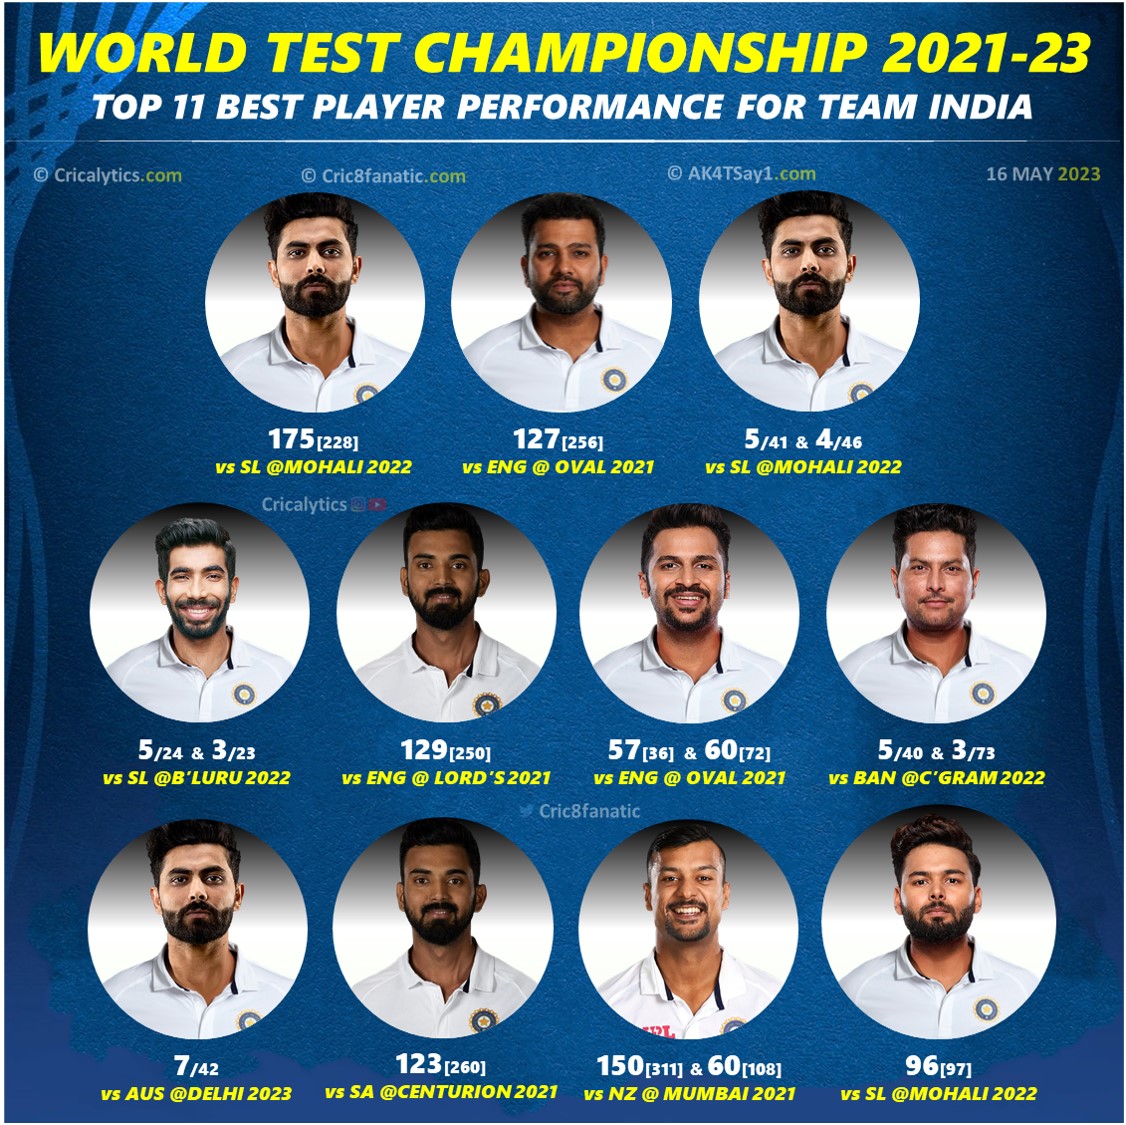 WTC Final 2023 Top 11 Best Player Performance for Team India